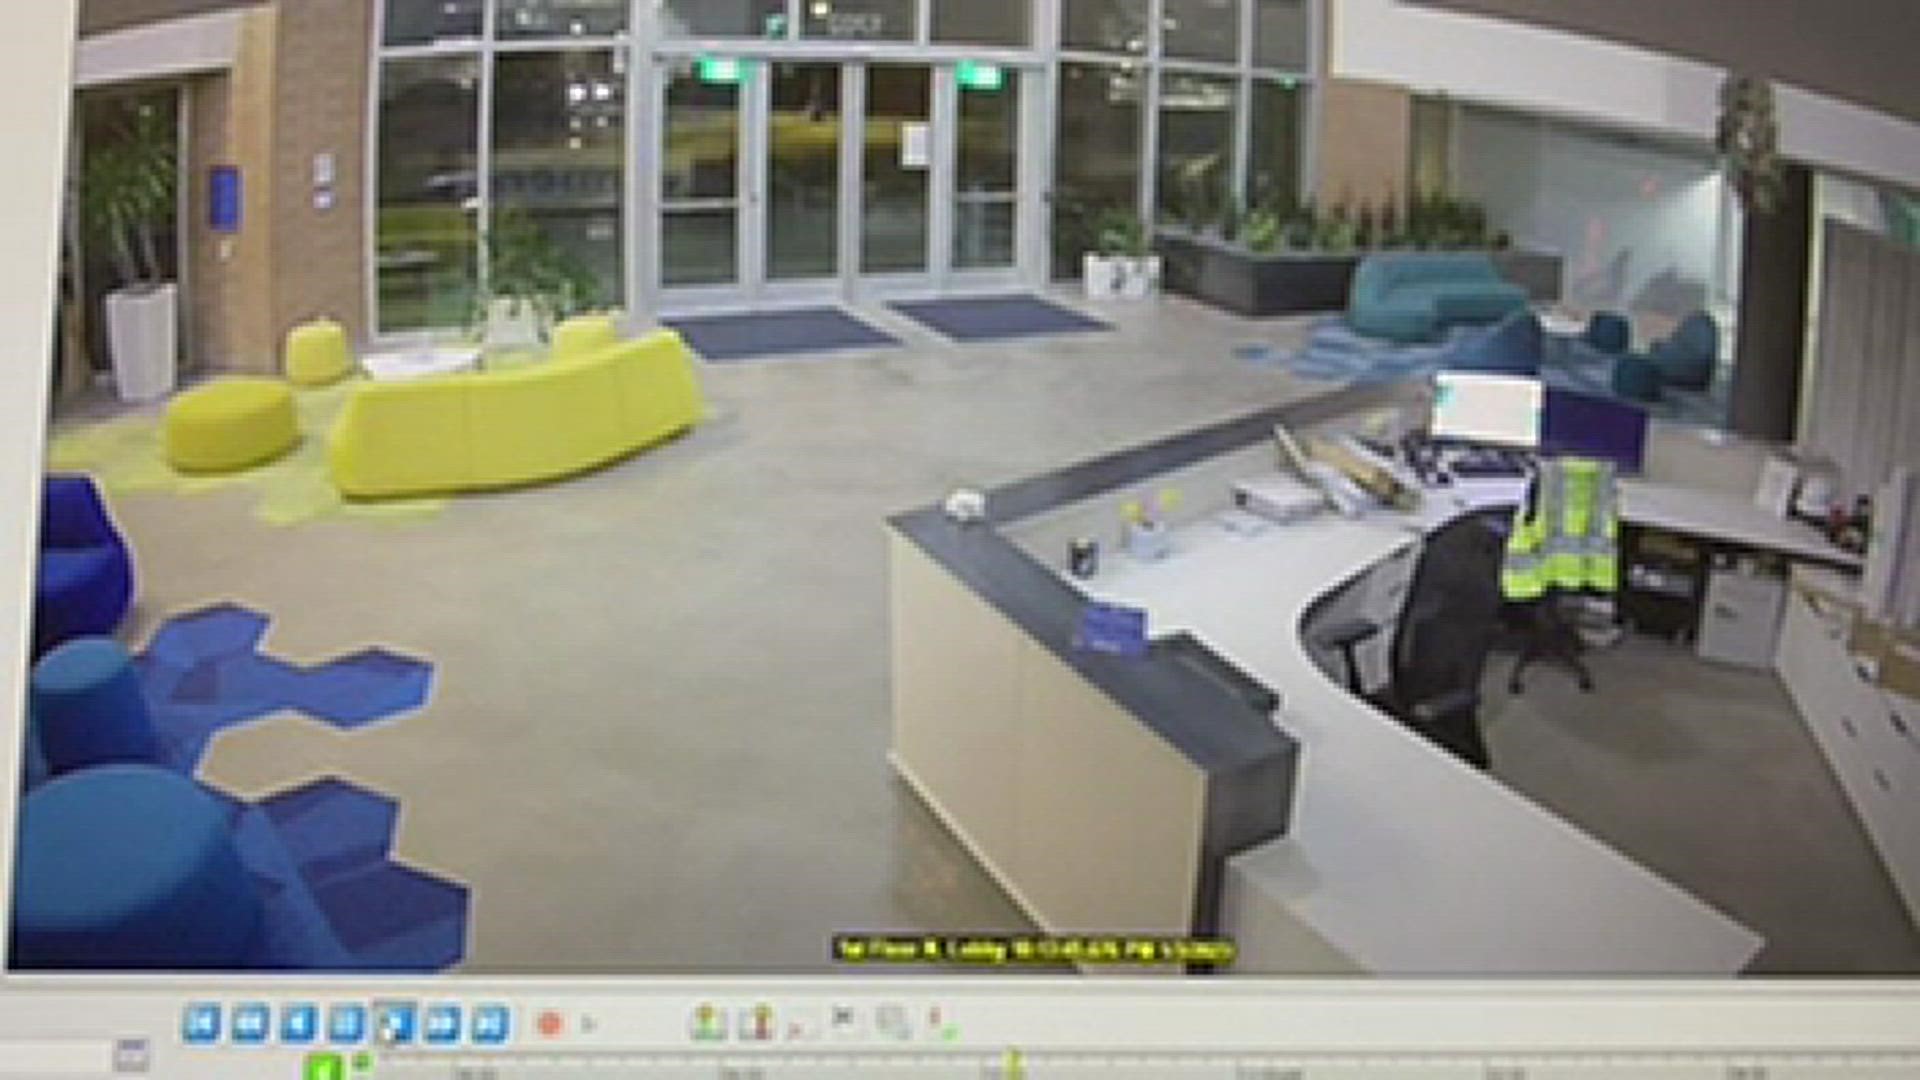 Video surveillance shows a car pulling up to the Make-a-Wish America office in Phoenix on Tuesday.